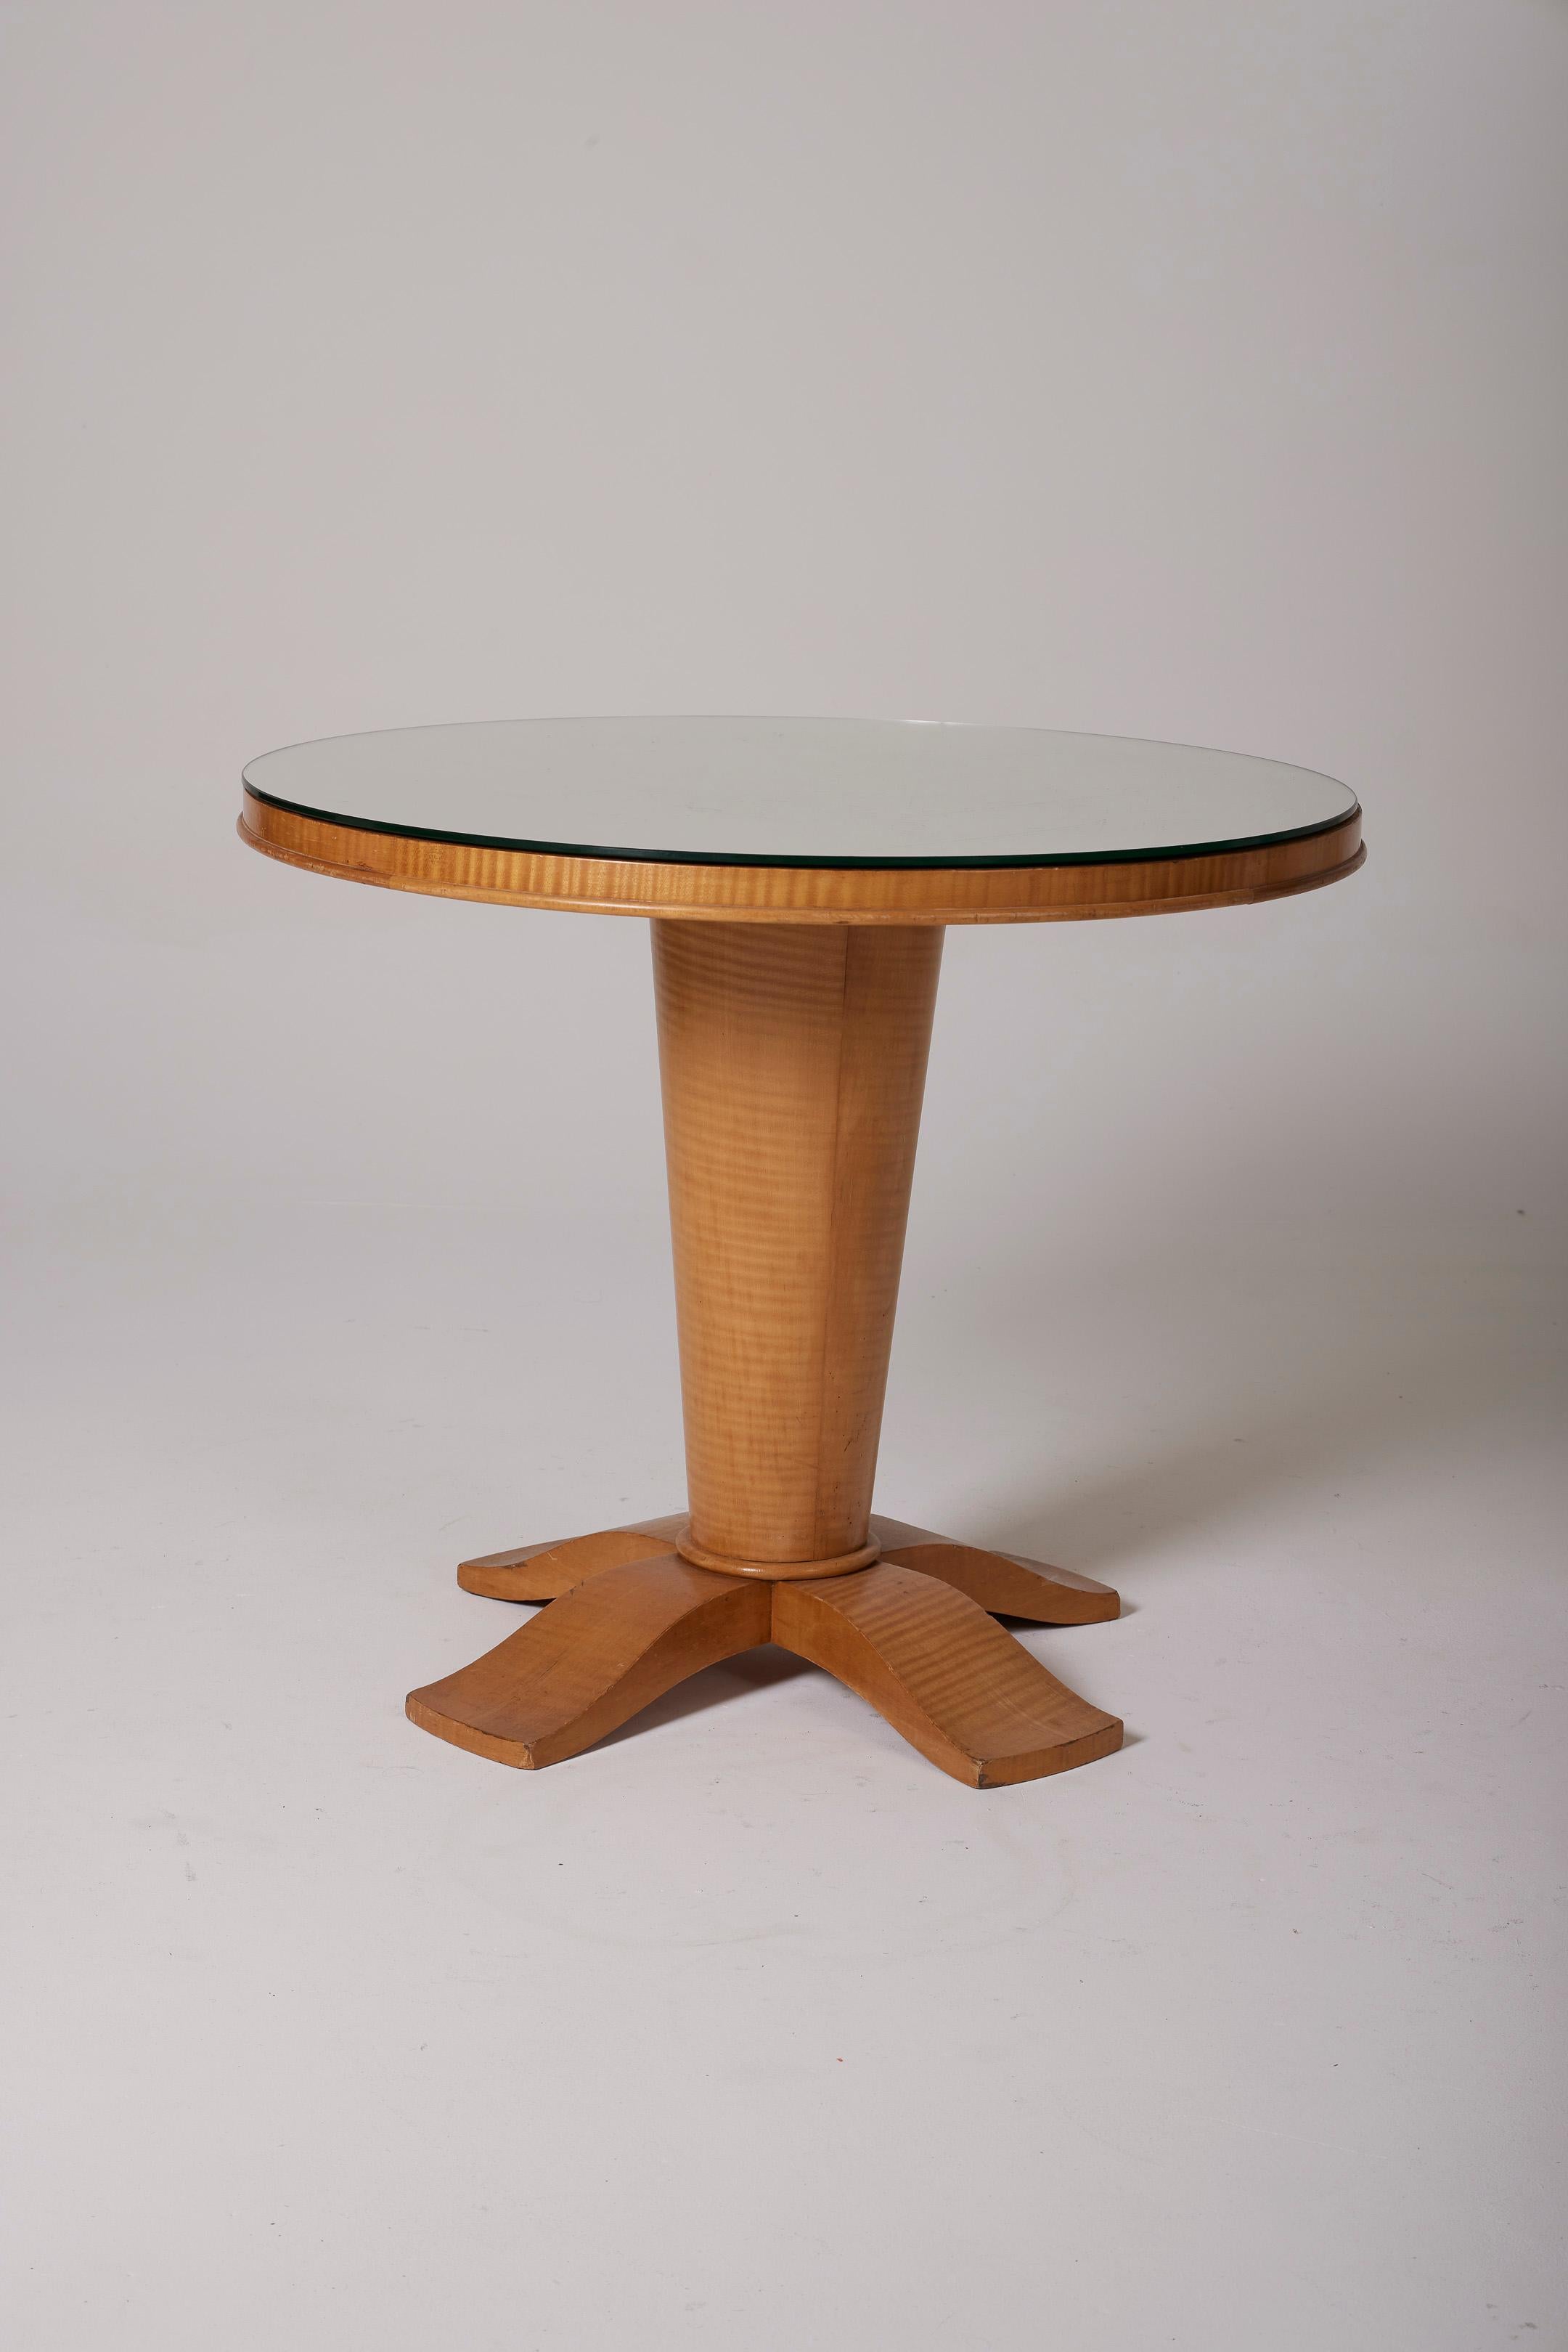 Art Deco pedestal table or side table composed of a mirrored top and a sycamore structure. Good condition, some scratches are noted on the surface of the top.
DV569